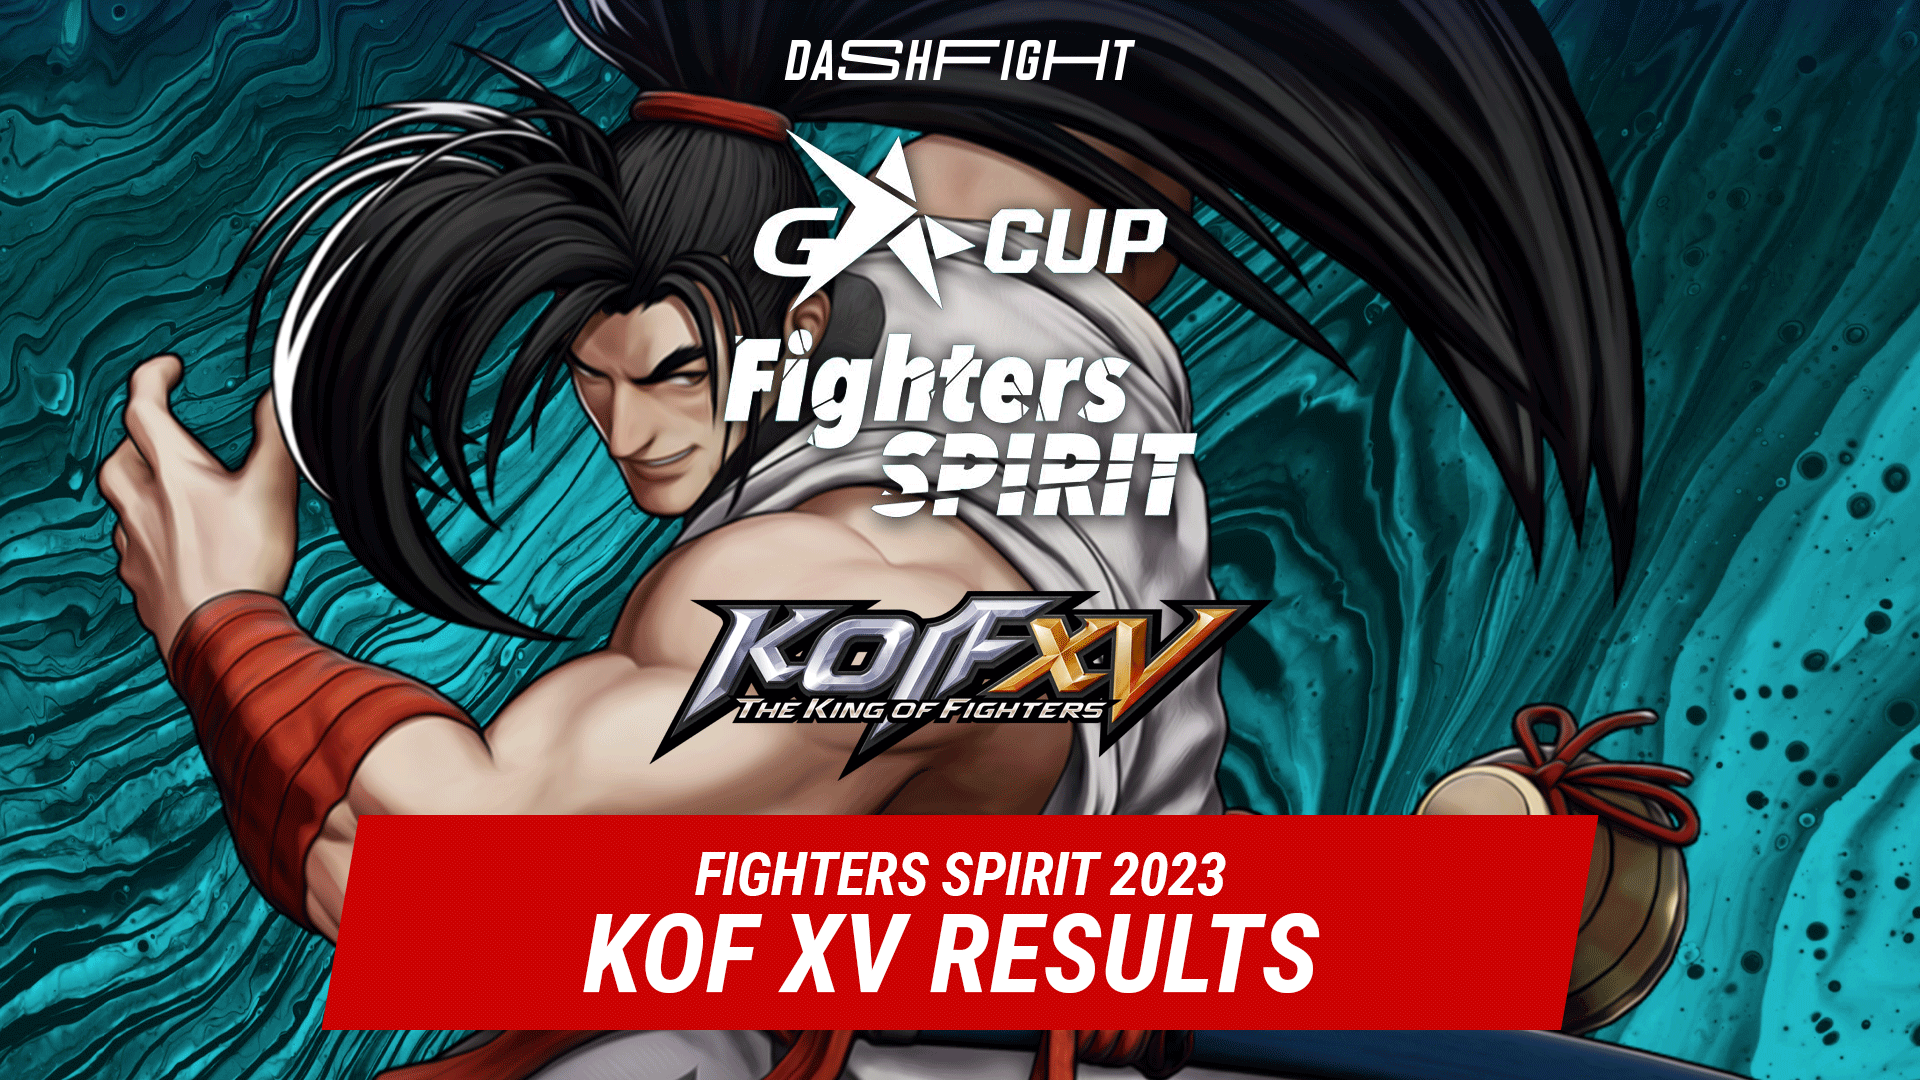 THE KING OF FIGHTERS XV - Twitch